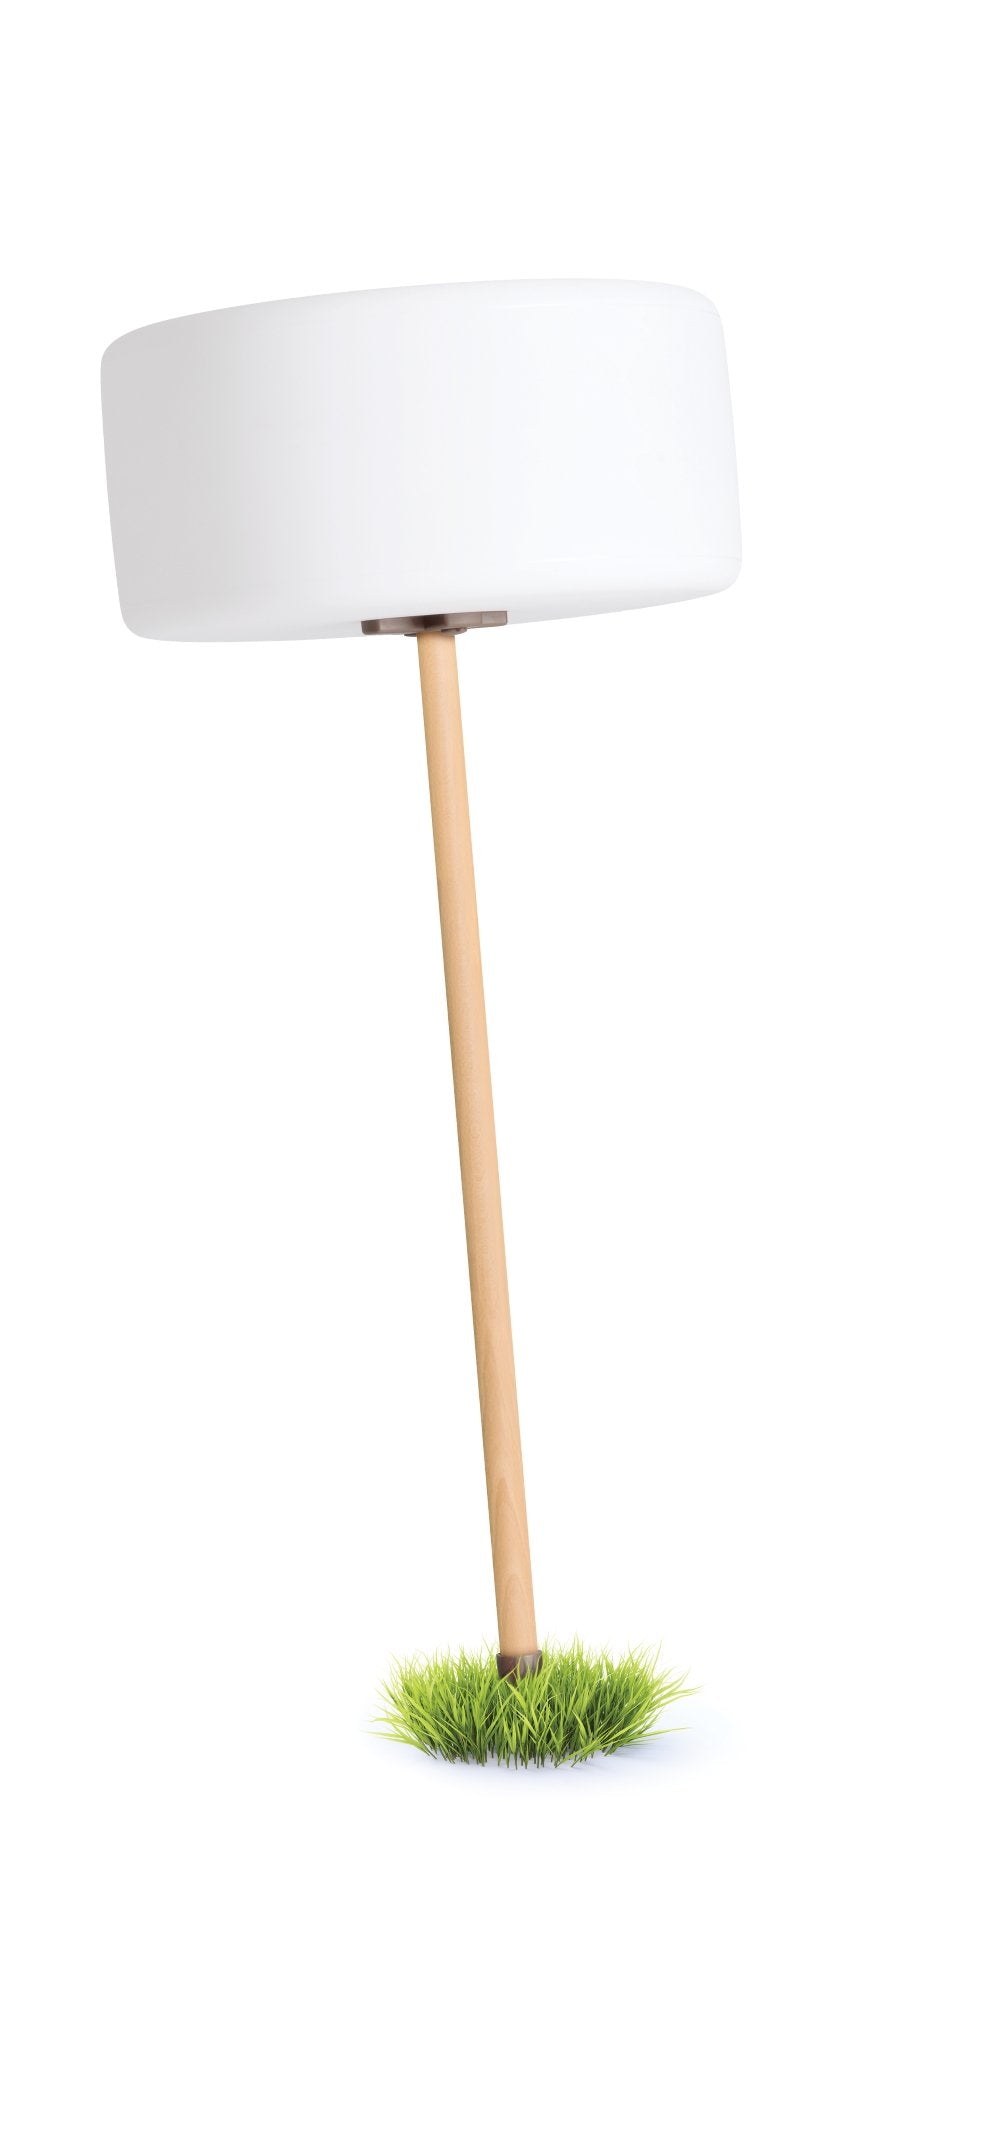 Fatboy Thierry Le Swinger hanglamp, taupe